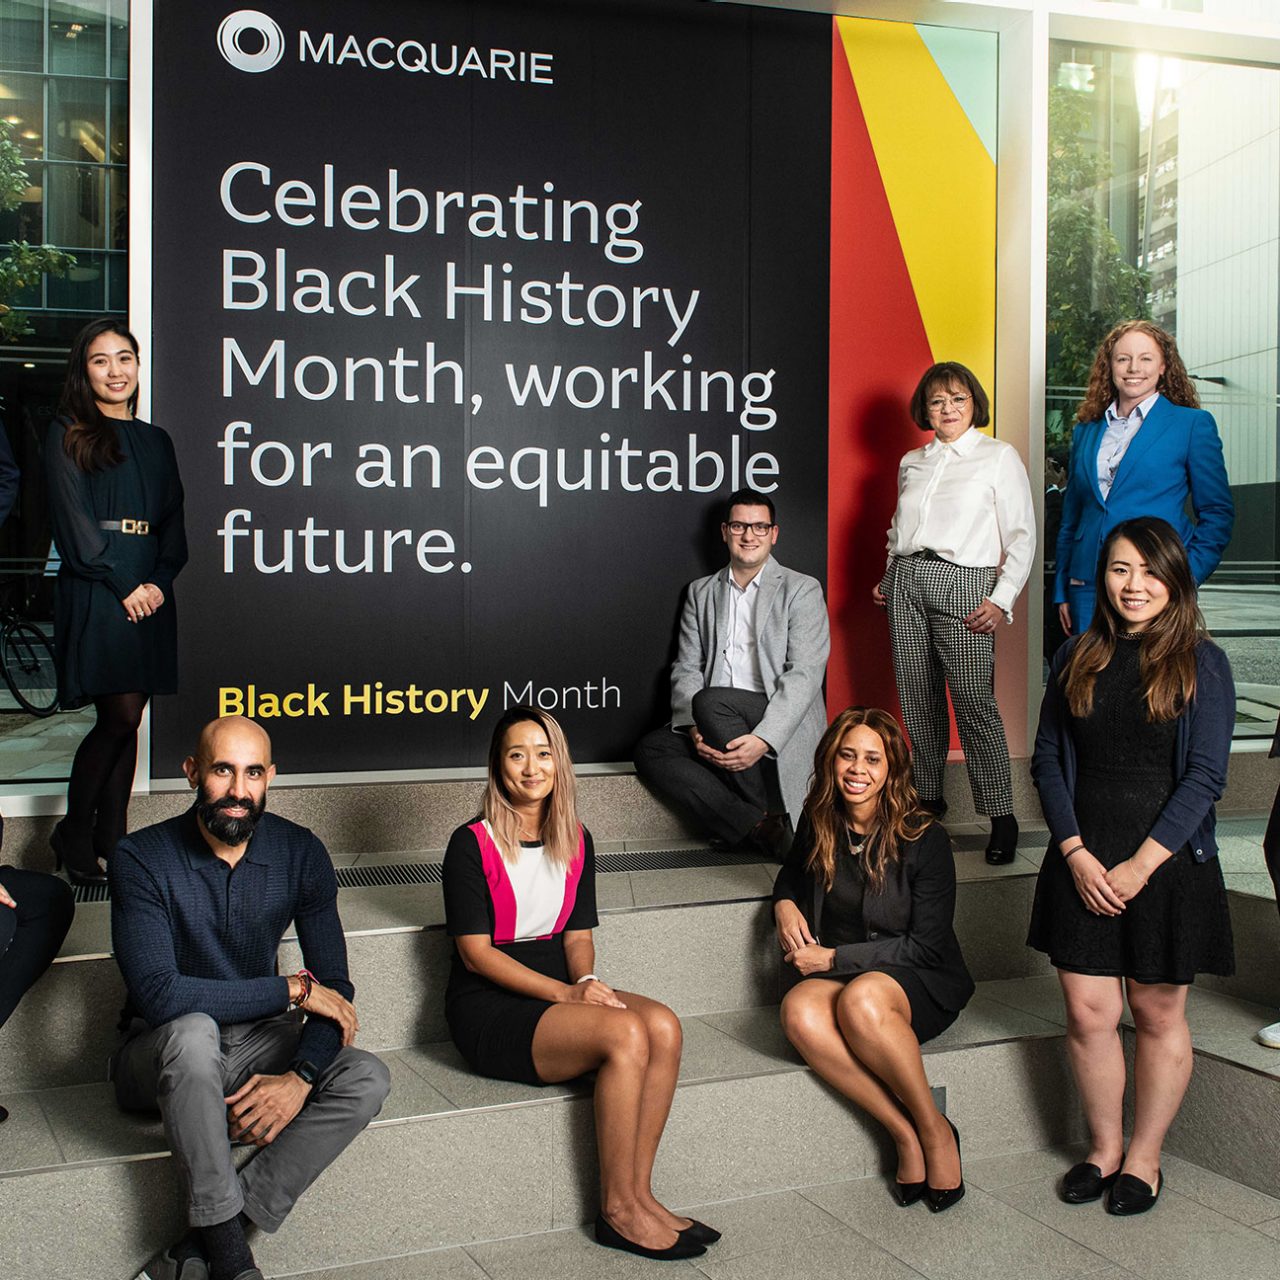 Macquarie employees celebrating Black History Month, working for a more equitable future